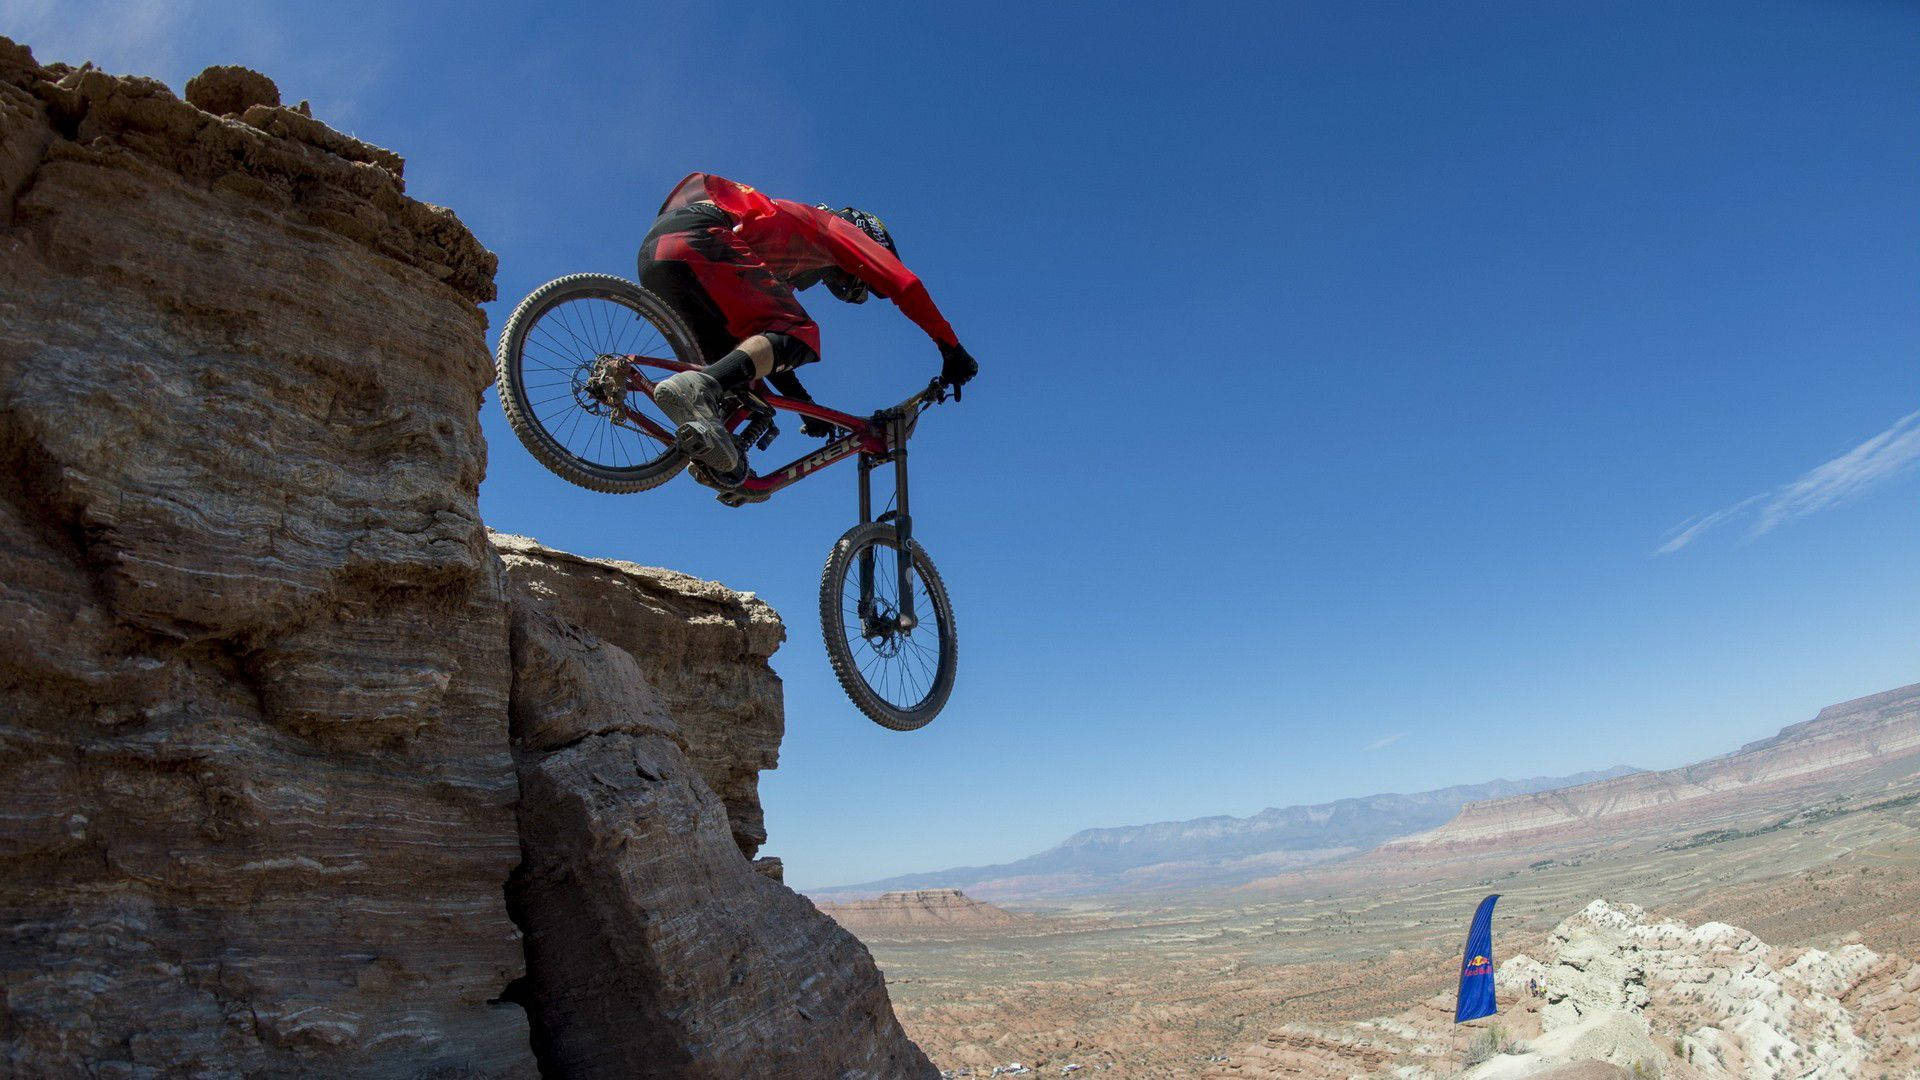 Rock Mountain Downhill Extreme Mtb Ride Background